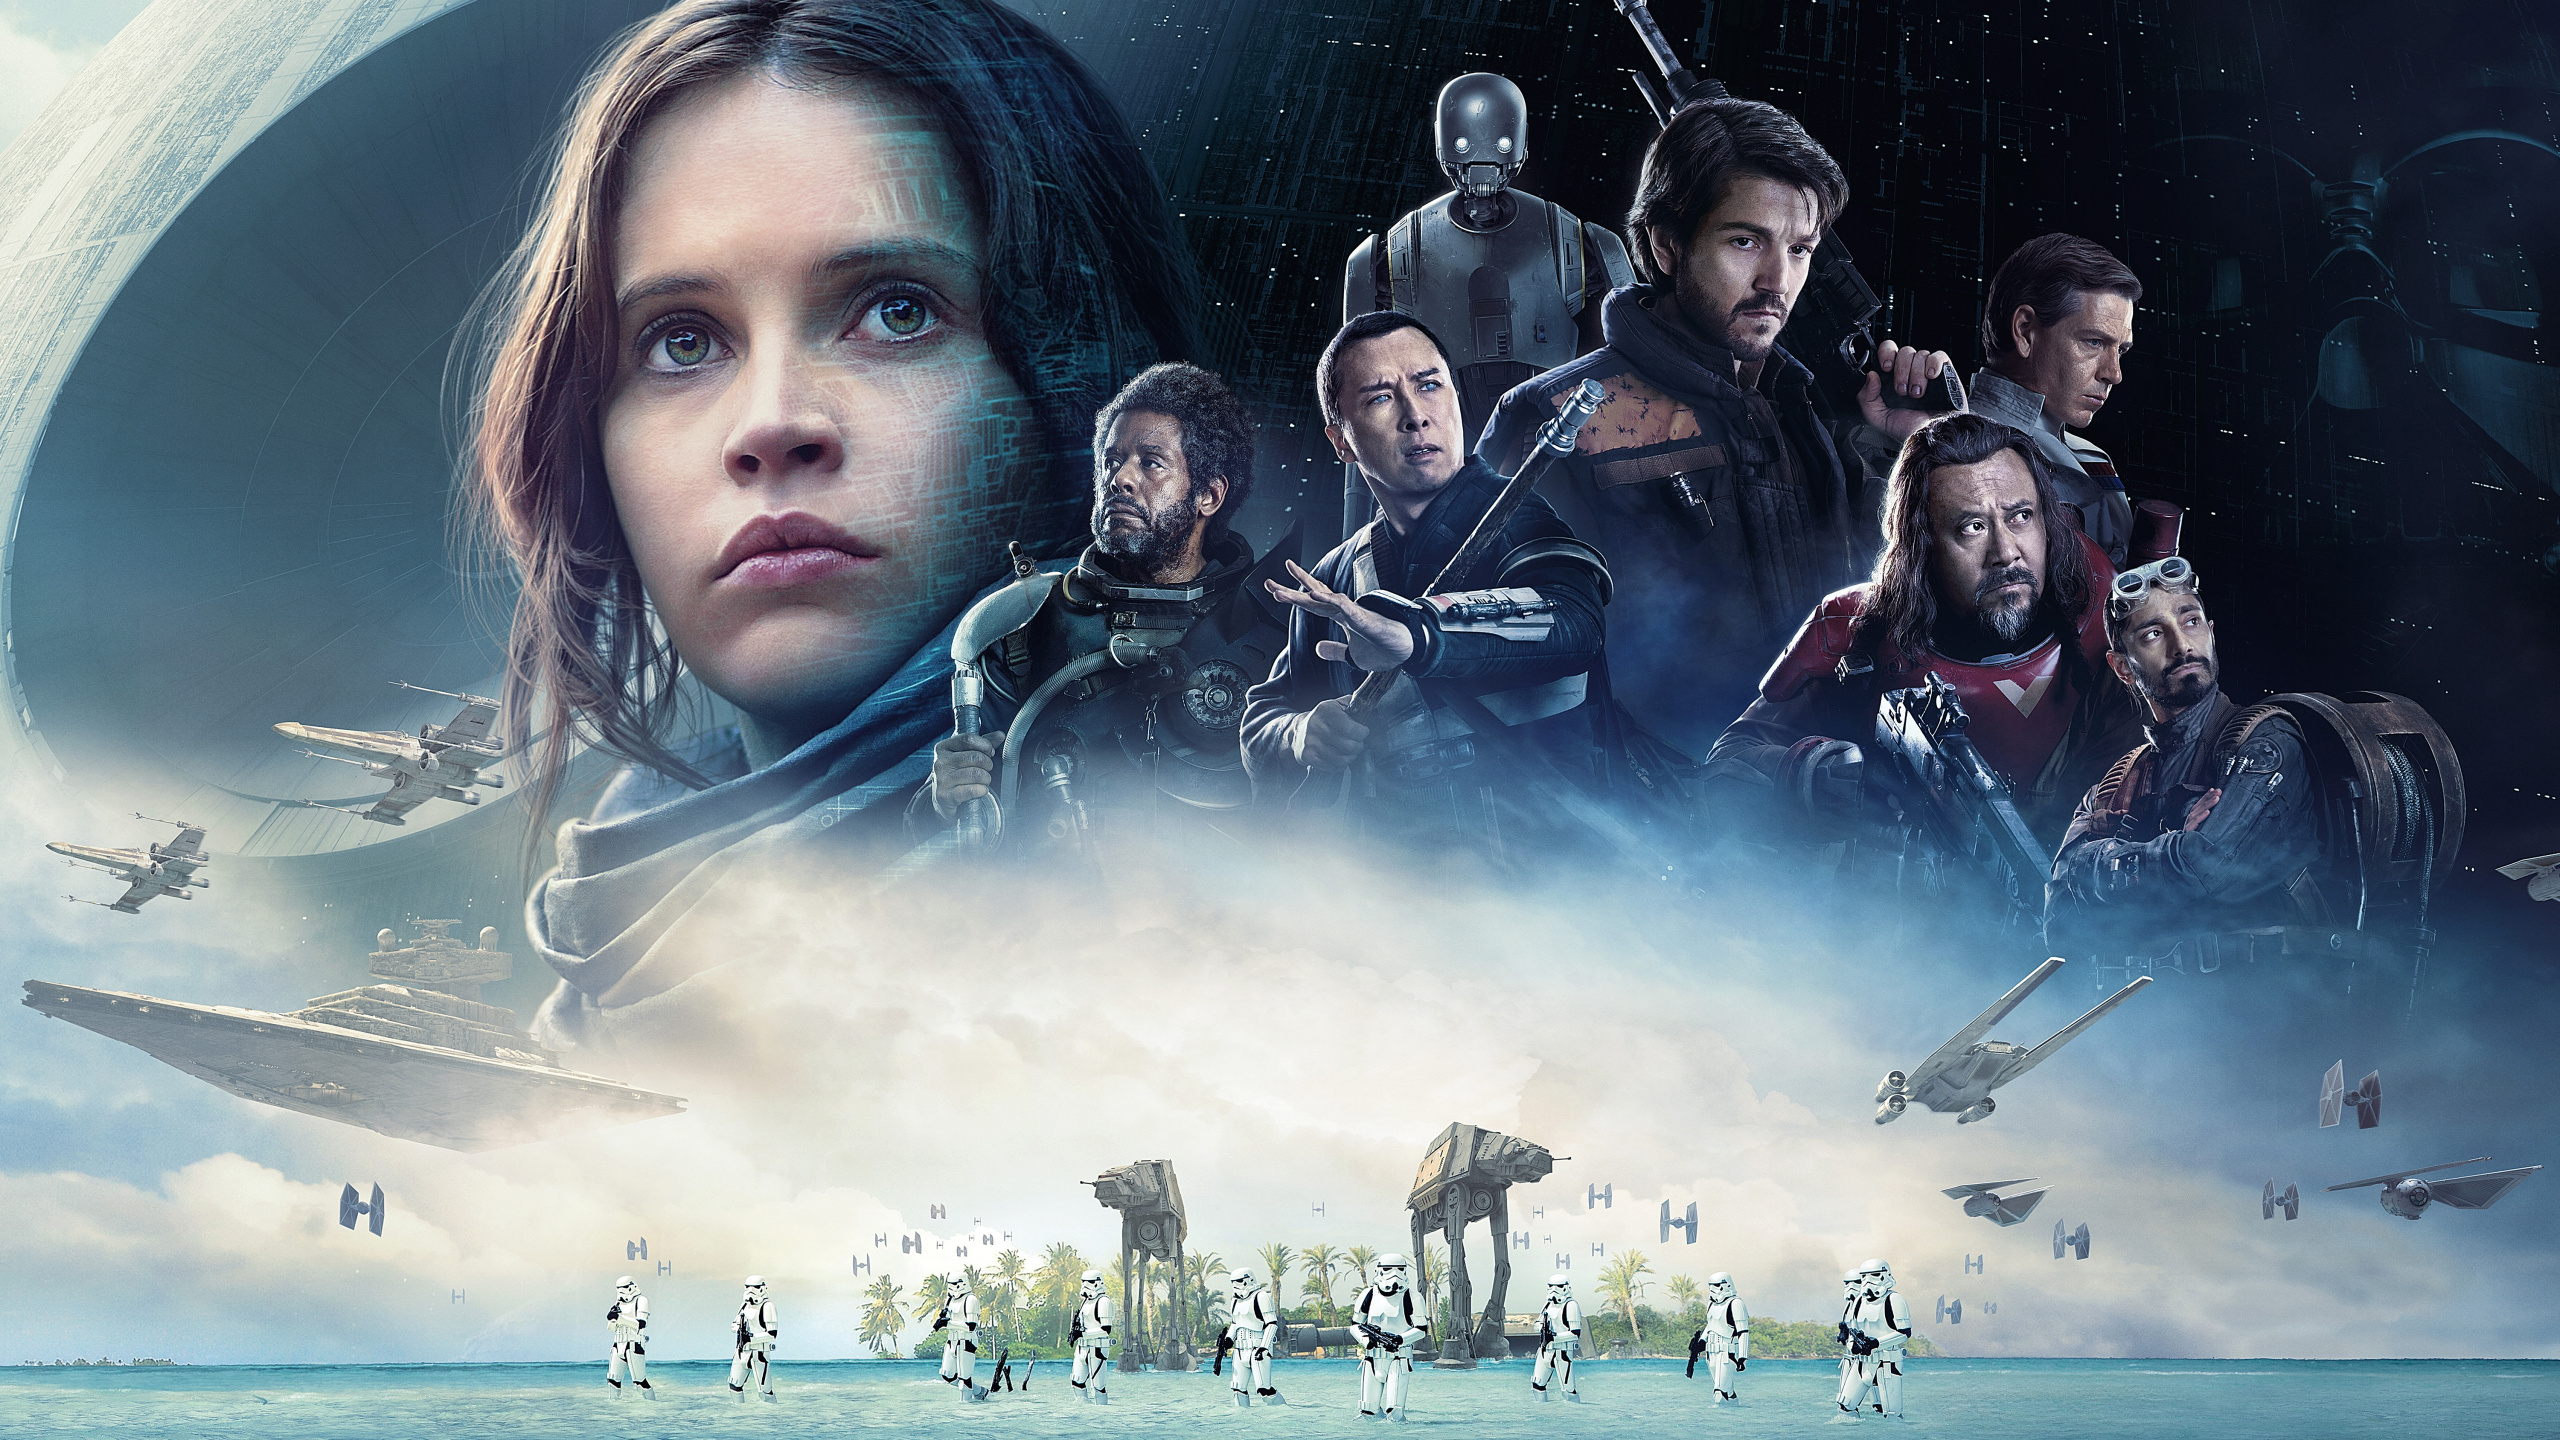 Gareth Edwards, Rogue One A Star Wars Story, Film, Monsters, Star Wars. Wallpaper in 2560x1440 Resolution